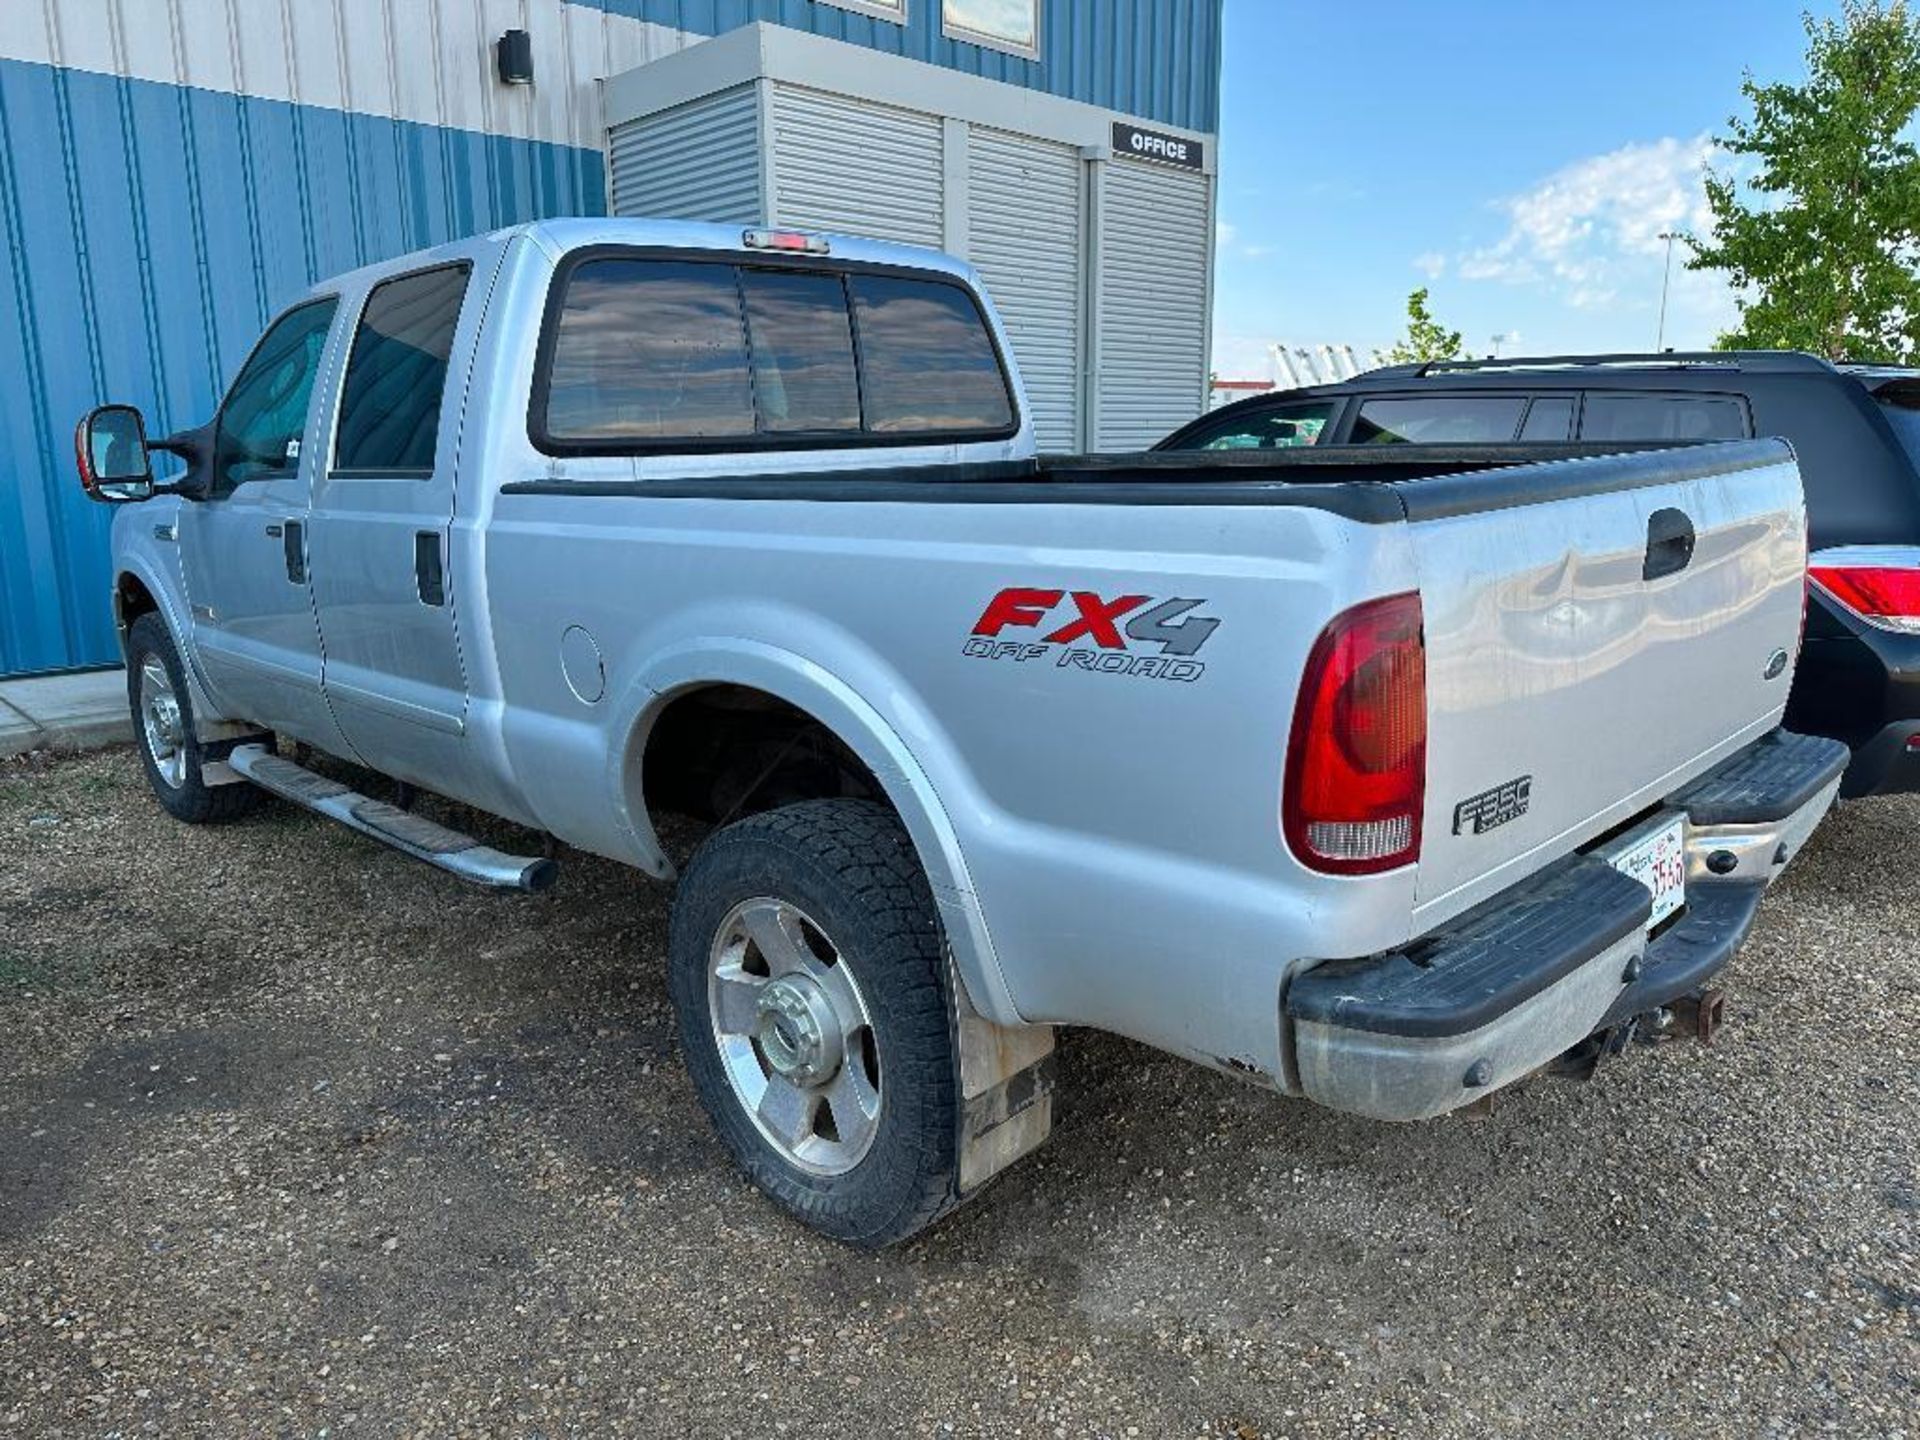 2007 Ford F-350 Crew Cab 4X4 Diesel, 257,842km Showing VIN #: 1FTWW31P27EA55133 - Image 4 of 12